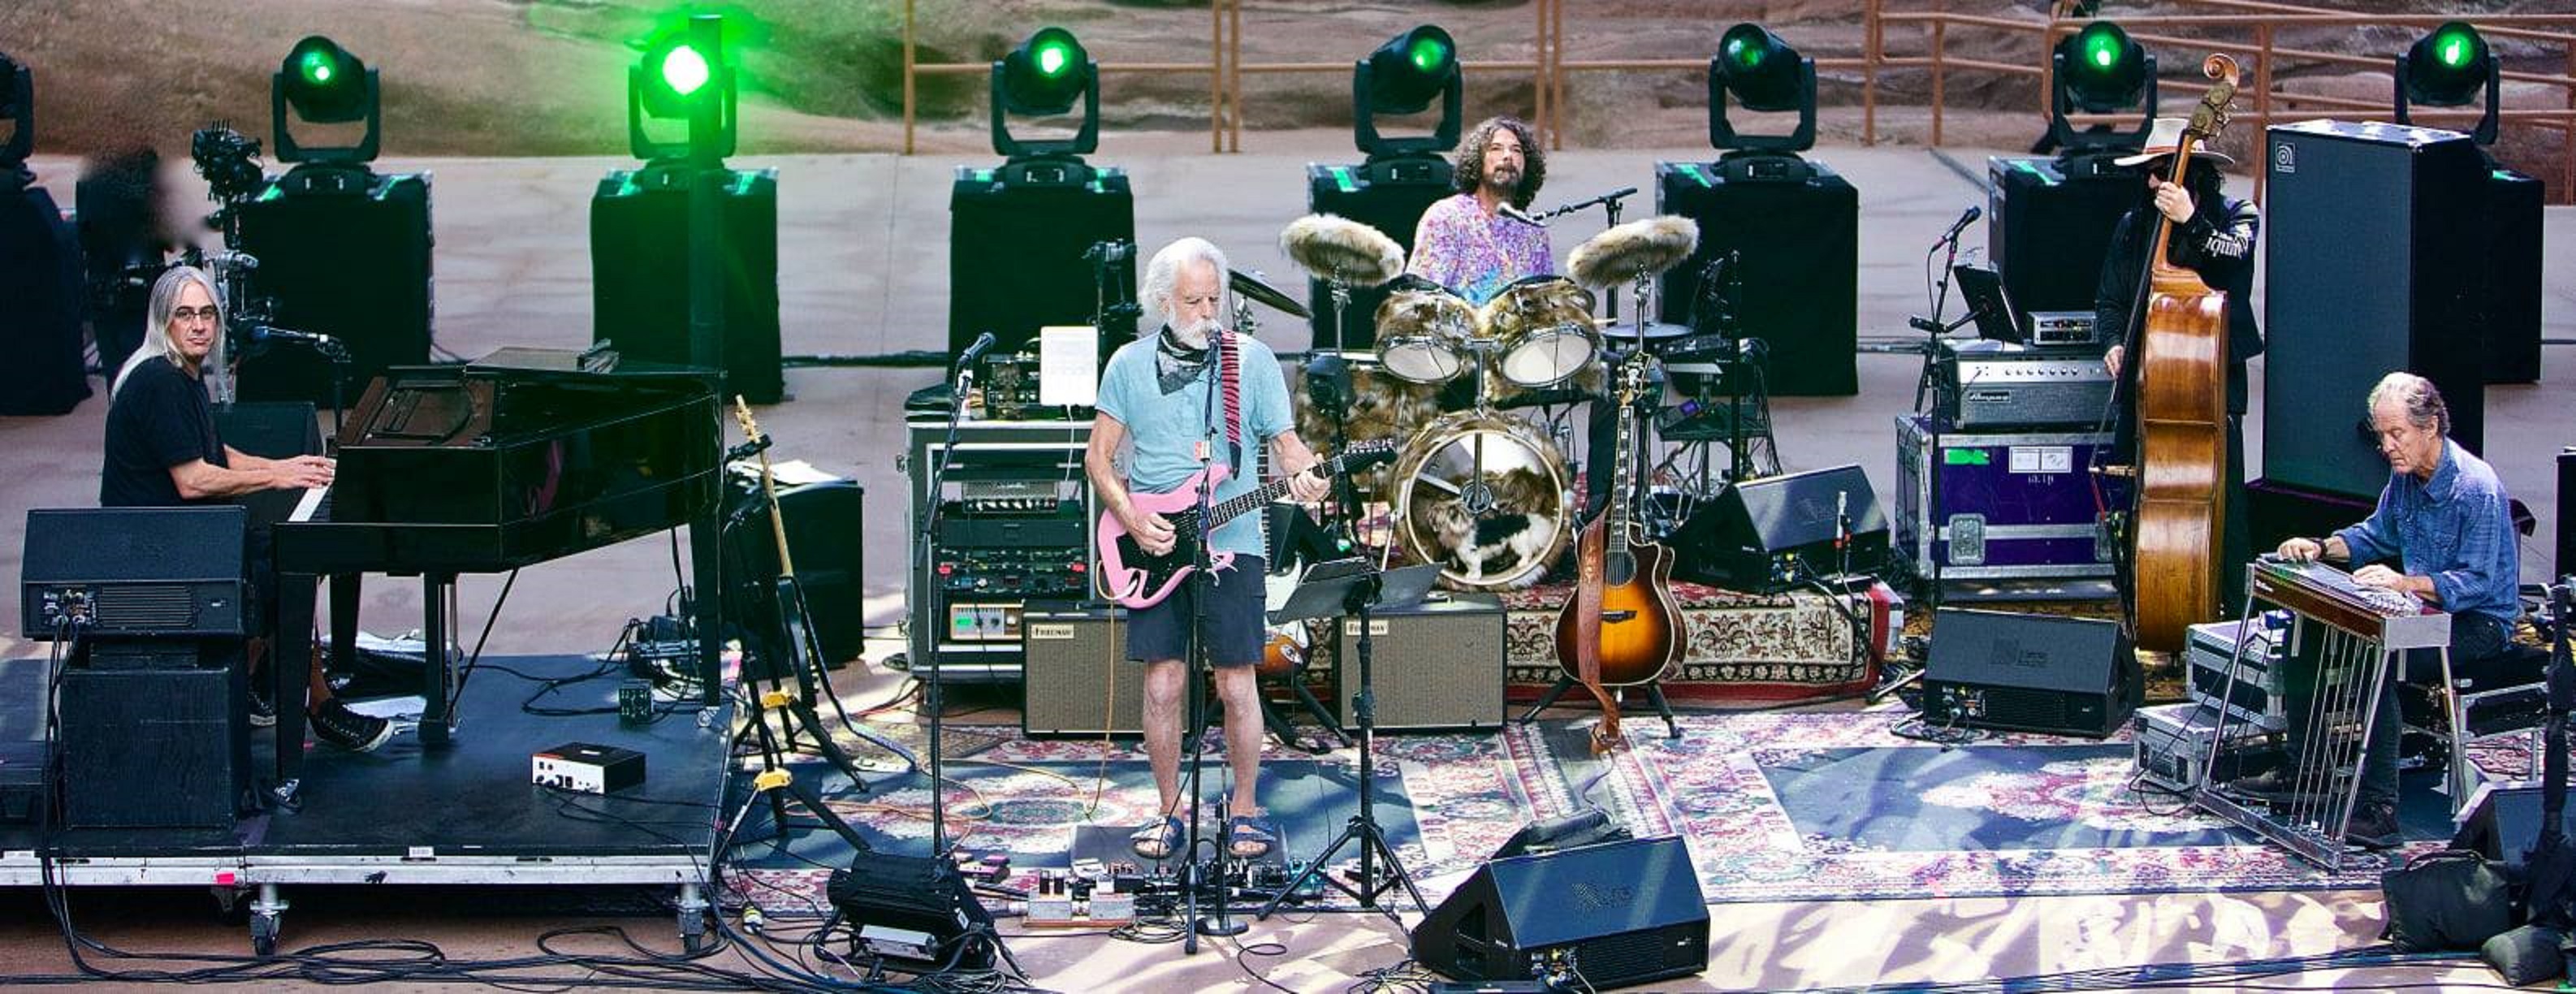 Bobby Weir & Wolf Bros: Share "Ripple" live performance, 'Live in Colorado: Vol 2' LP out 10/7 on Third Man Records